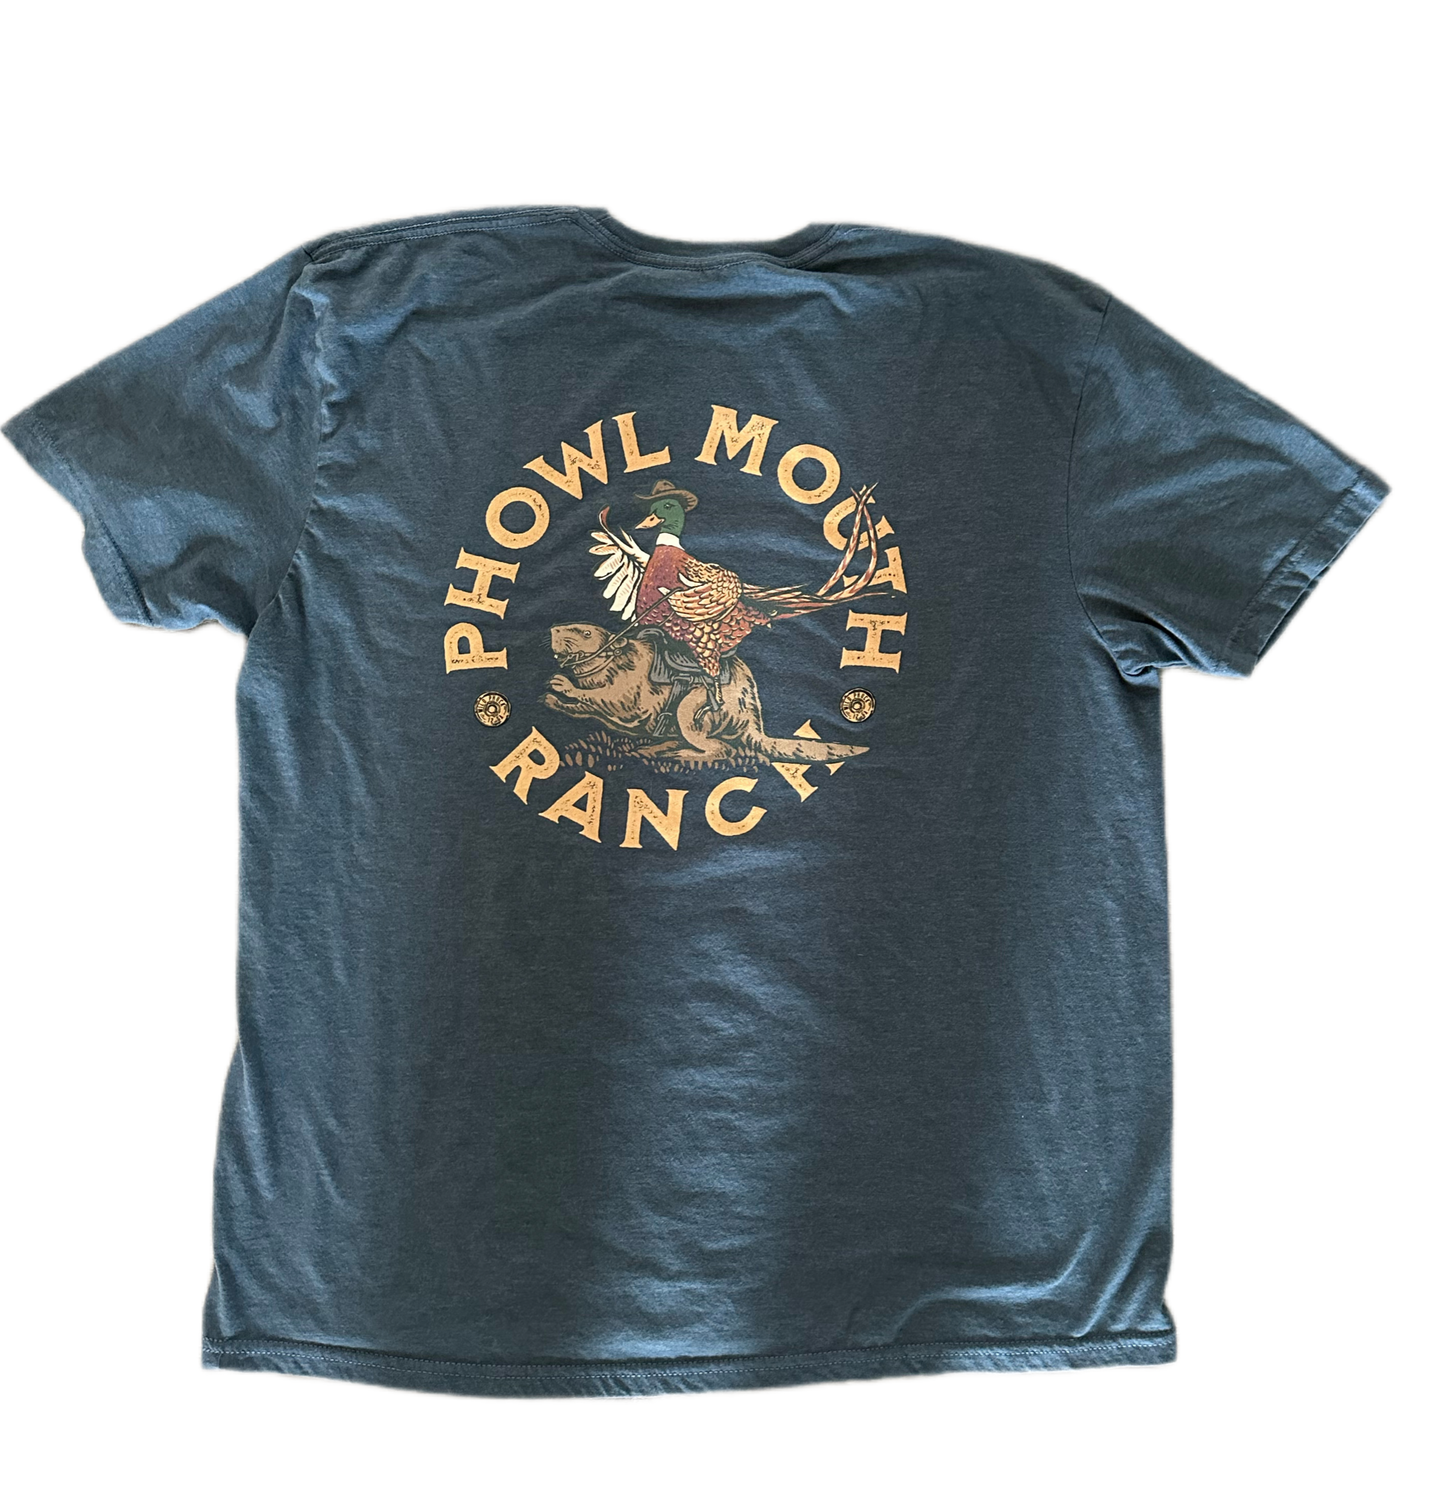 Phowl Mouth Ranch